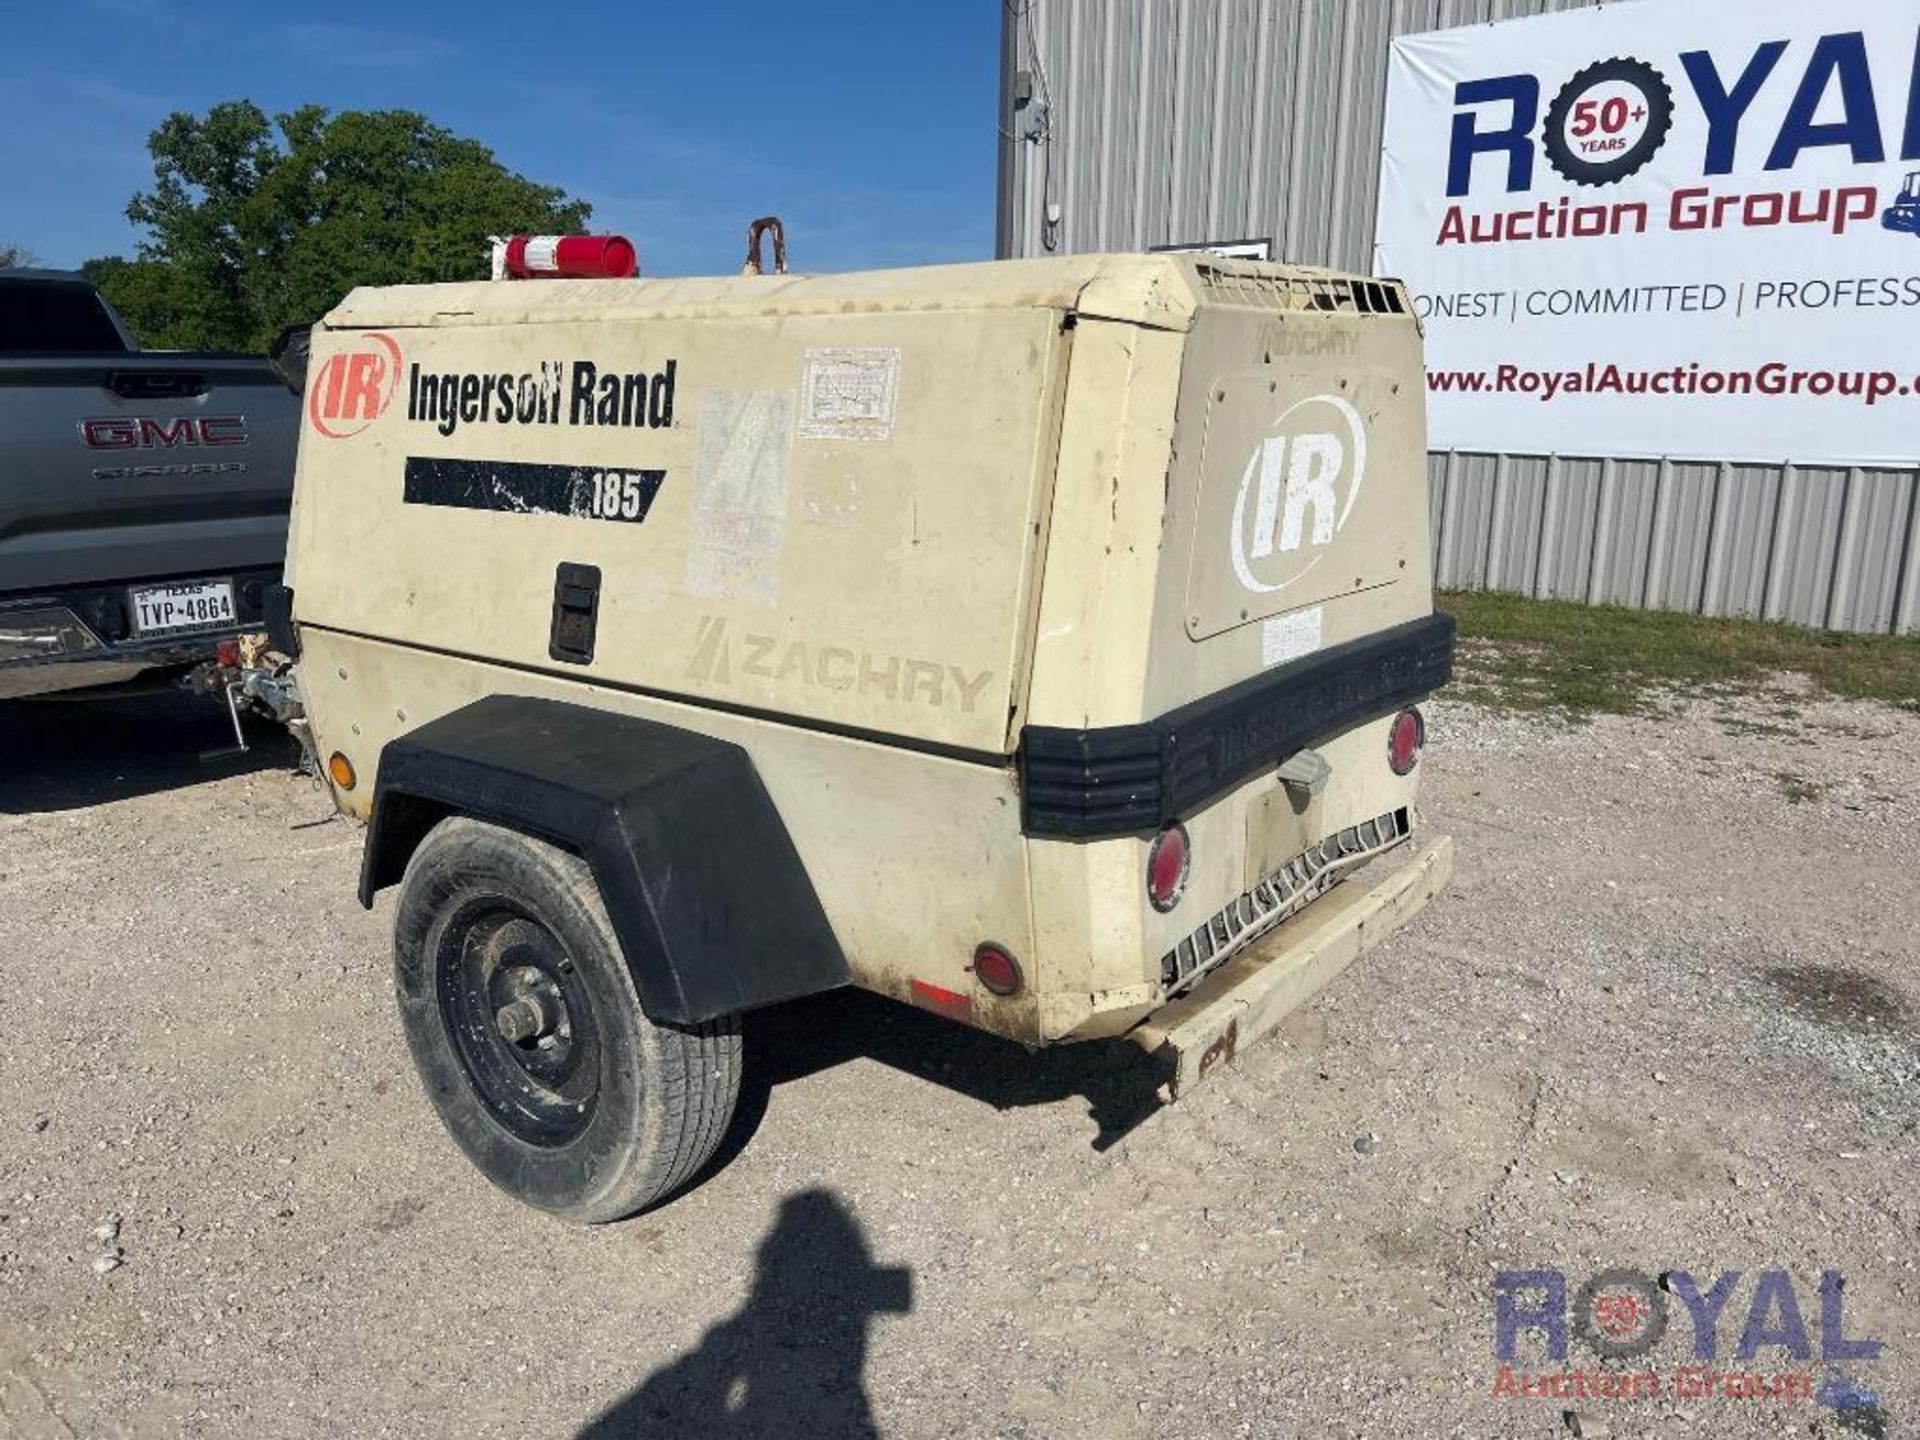 2001 Ingersoll Rand 185 CFM Towable Air Compressor - Image 4 of 19